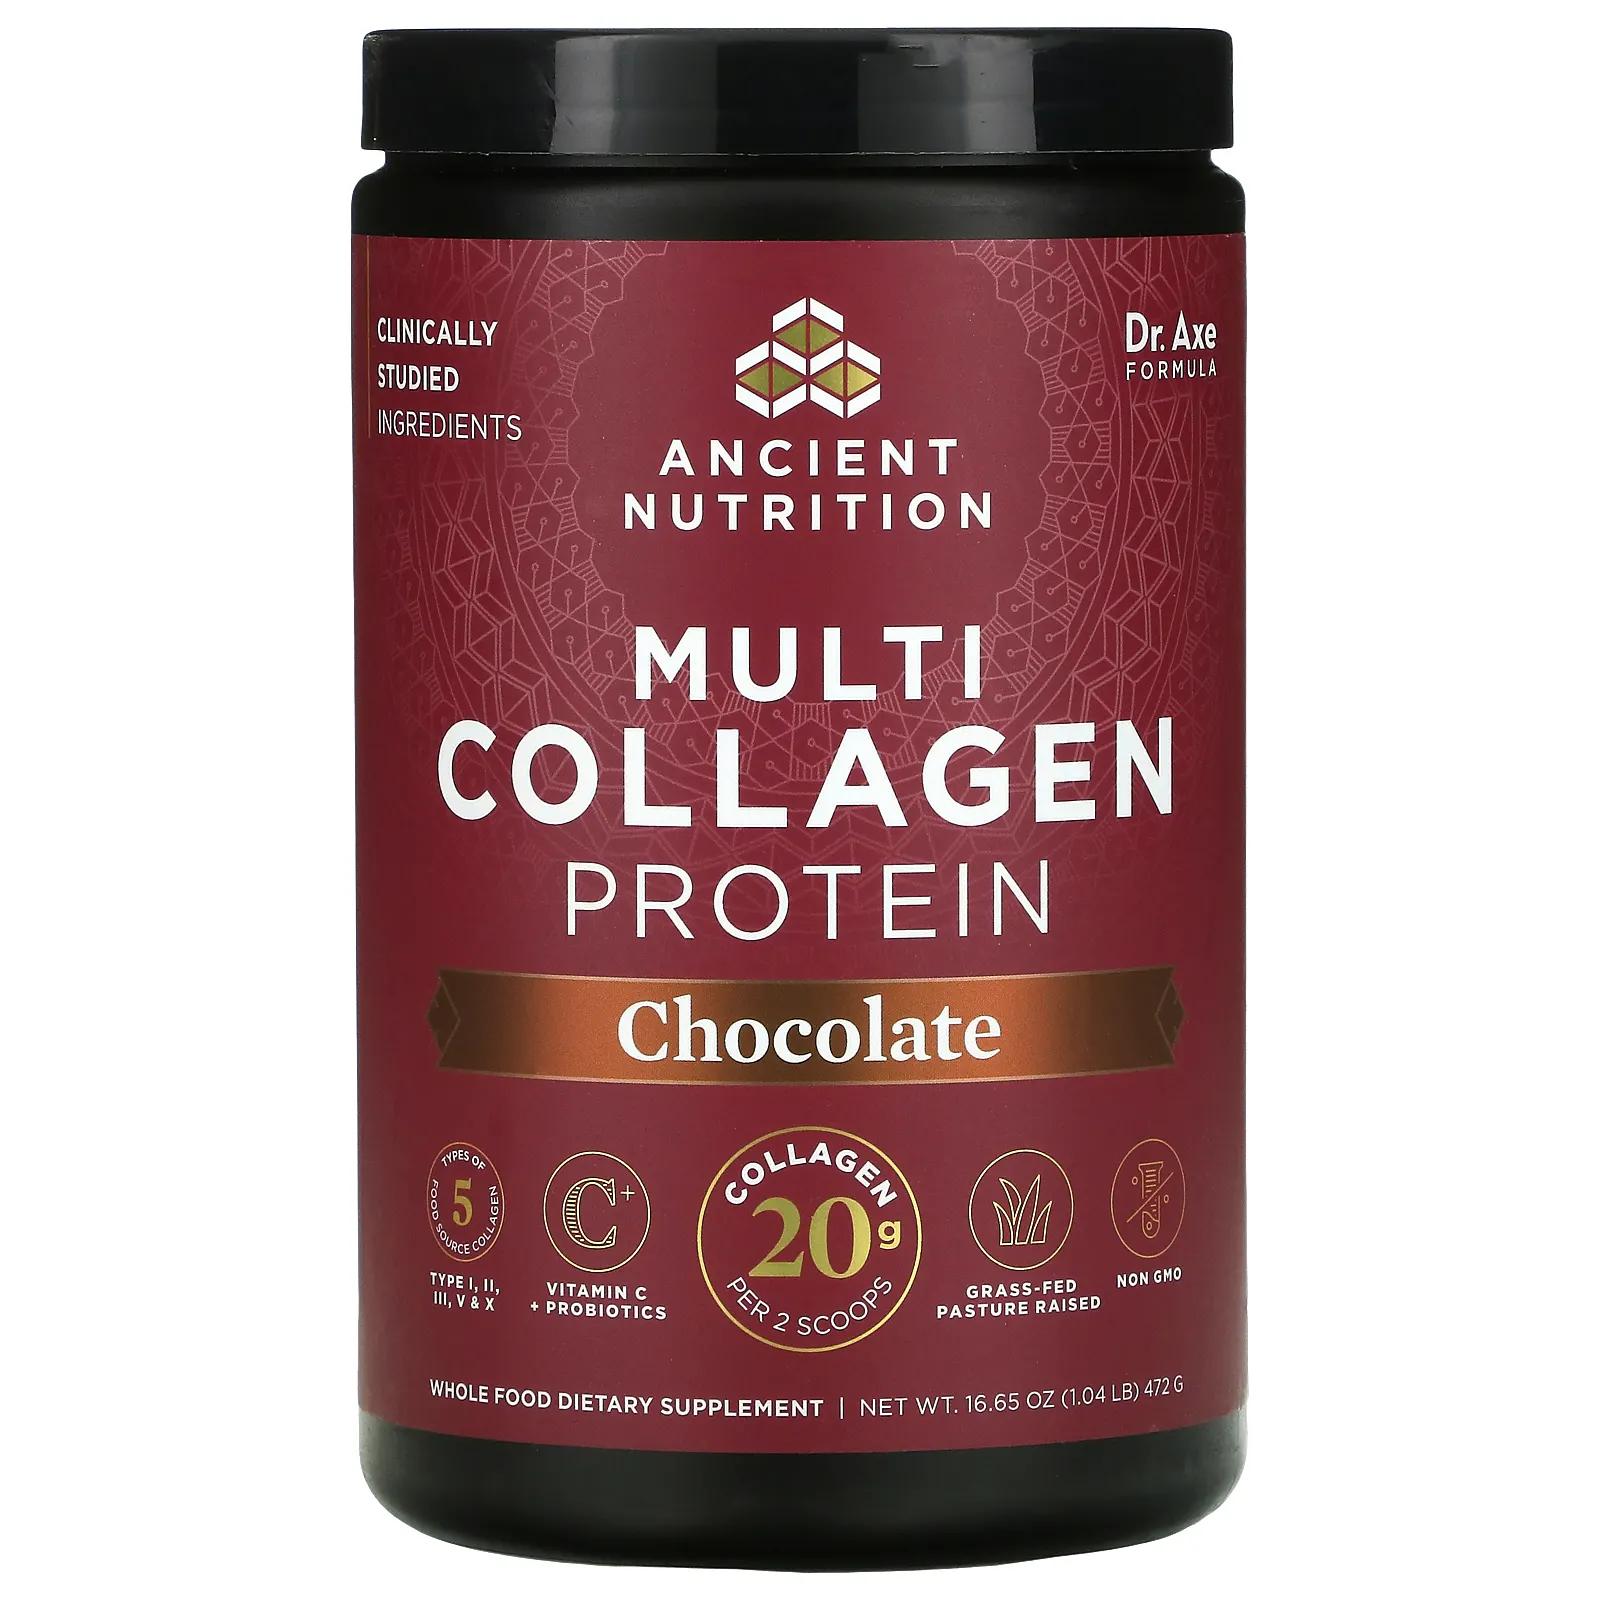 Dr. Axe / Ancient Nutrition Multi Collagen Protein Chocolate 18.5 oz (525 g)